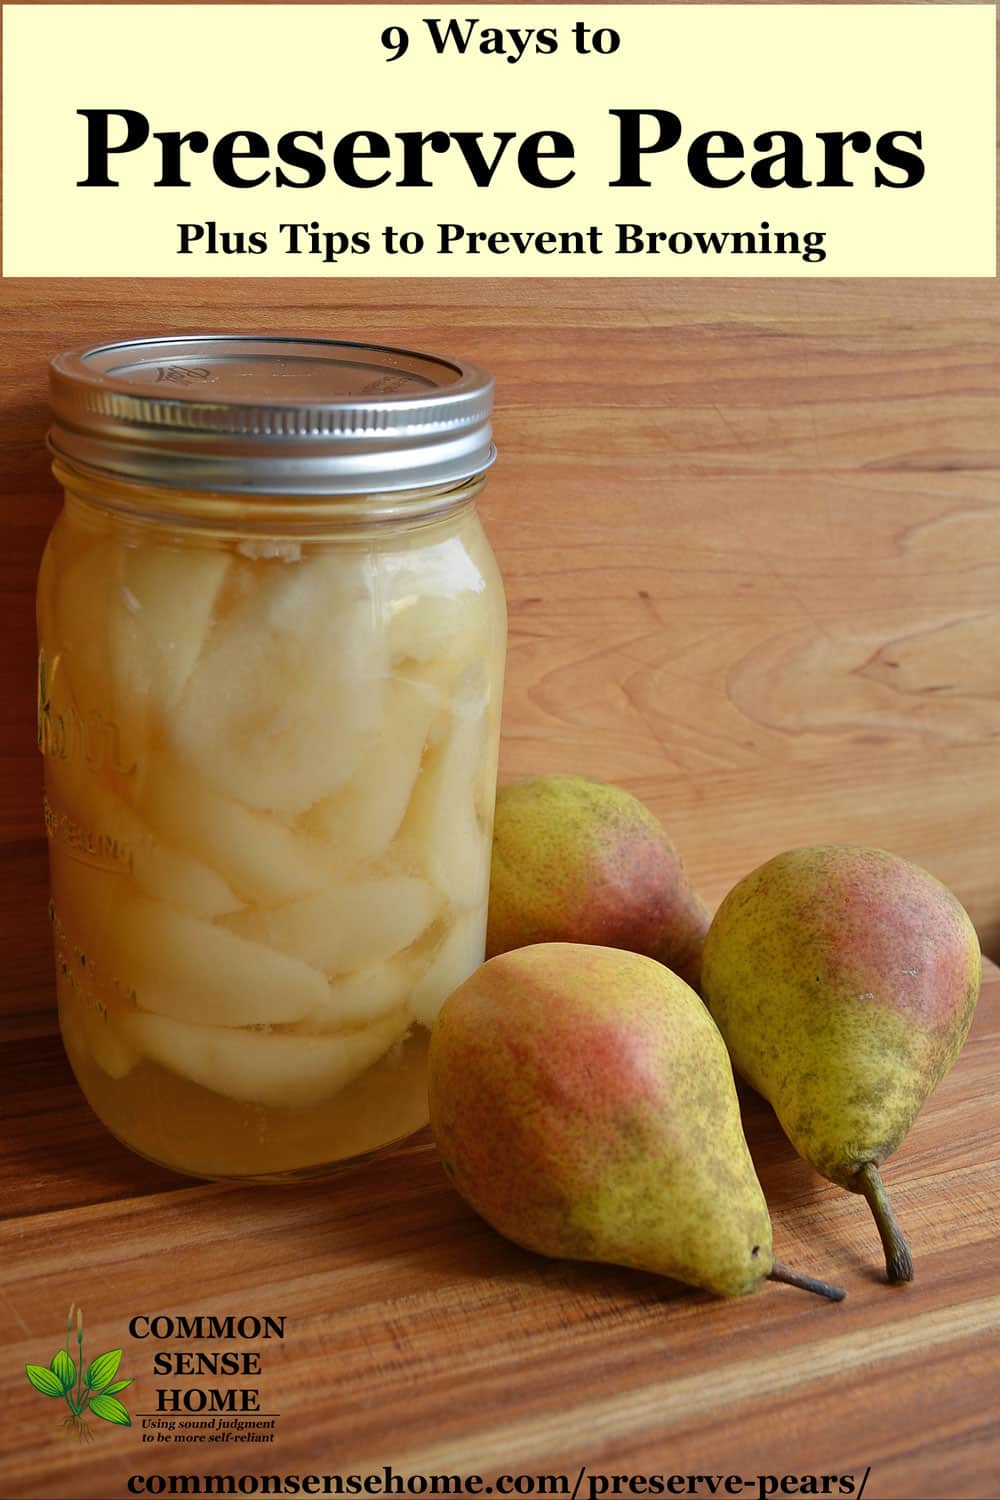 canned pears in jar with pears on the side